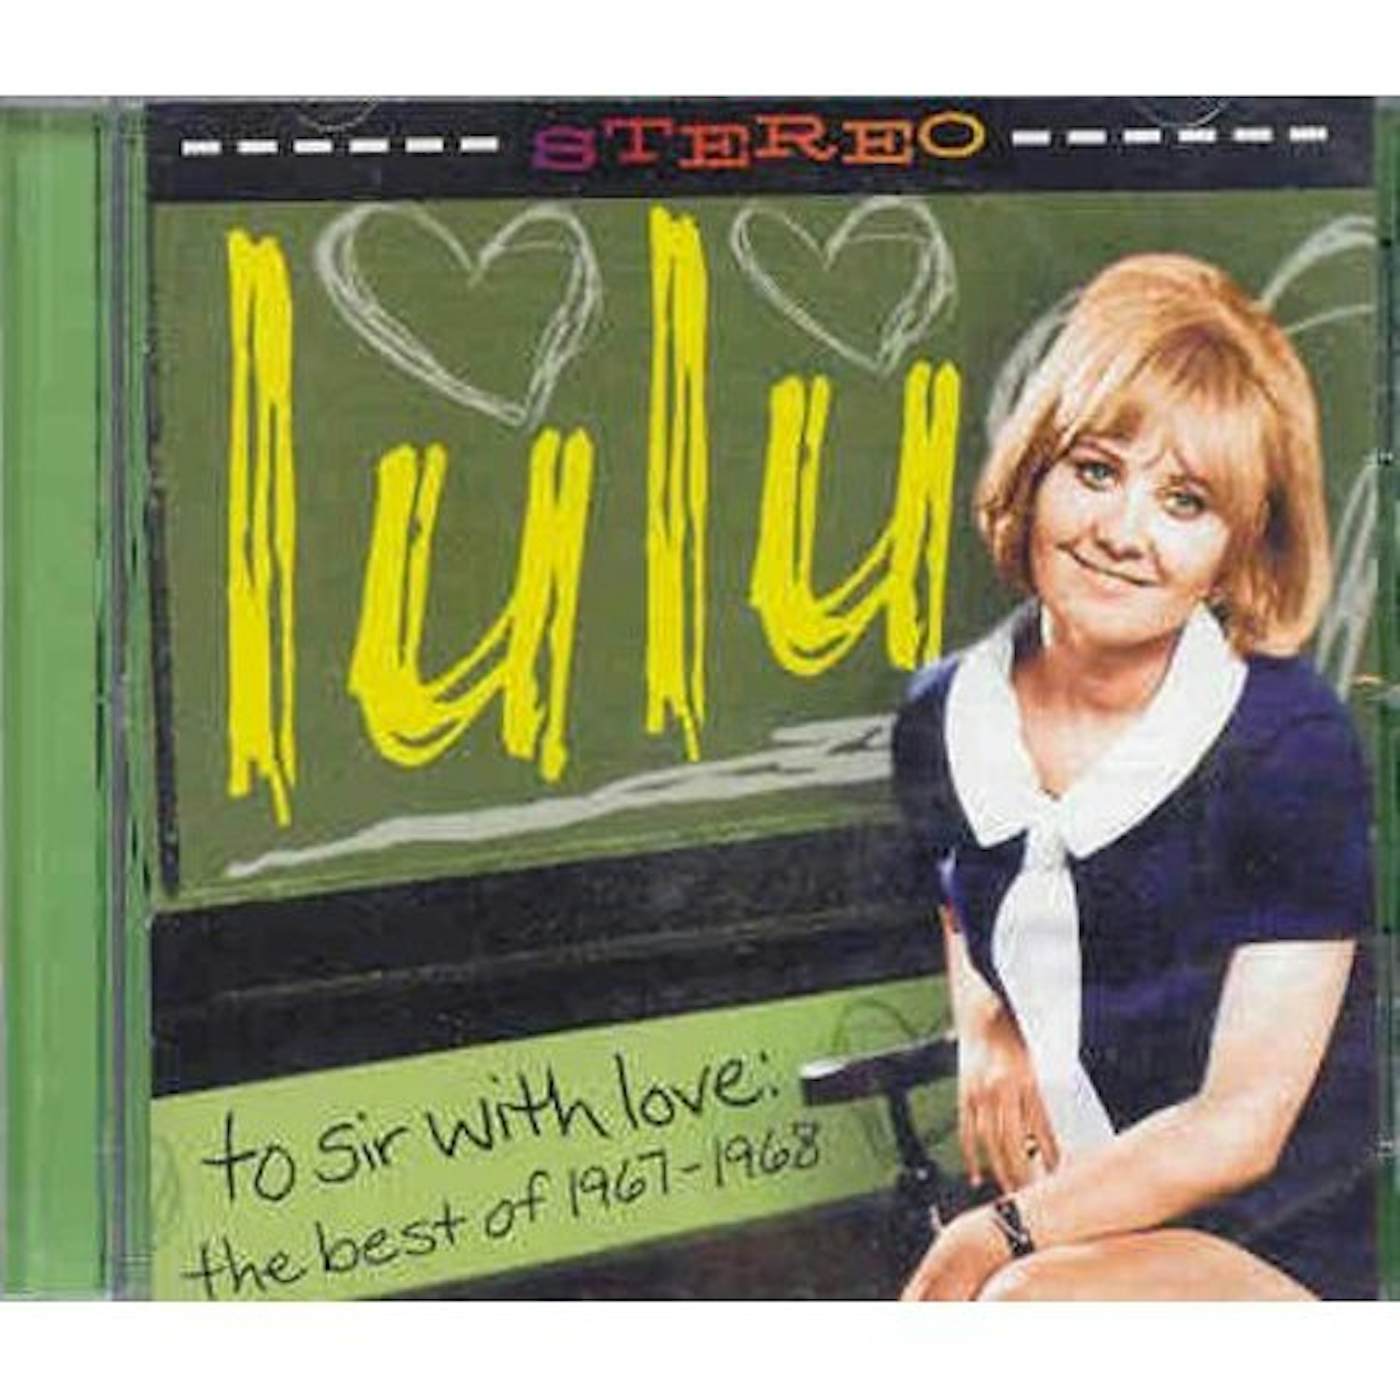 Lulu TO SIR WITH LOVE: THE BEST OF 1967-1968 CD